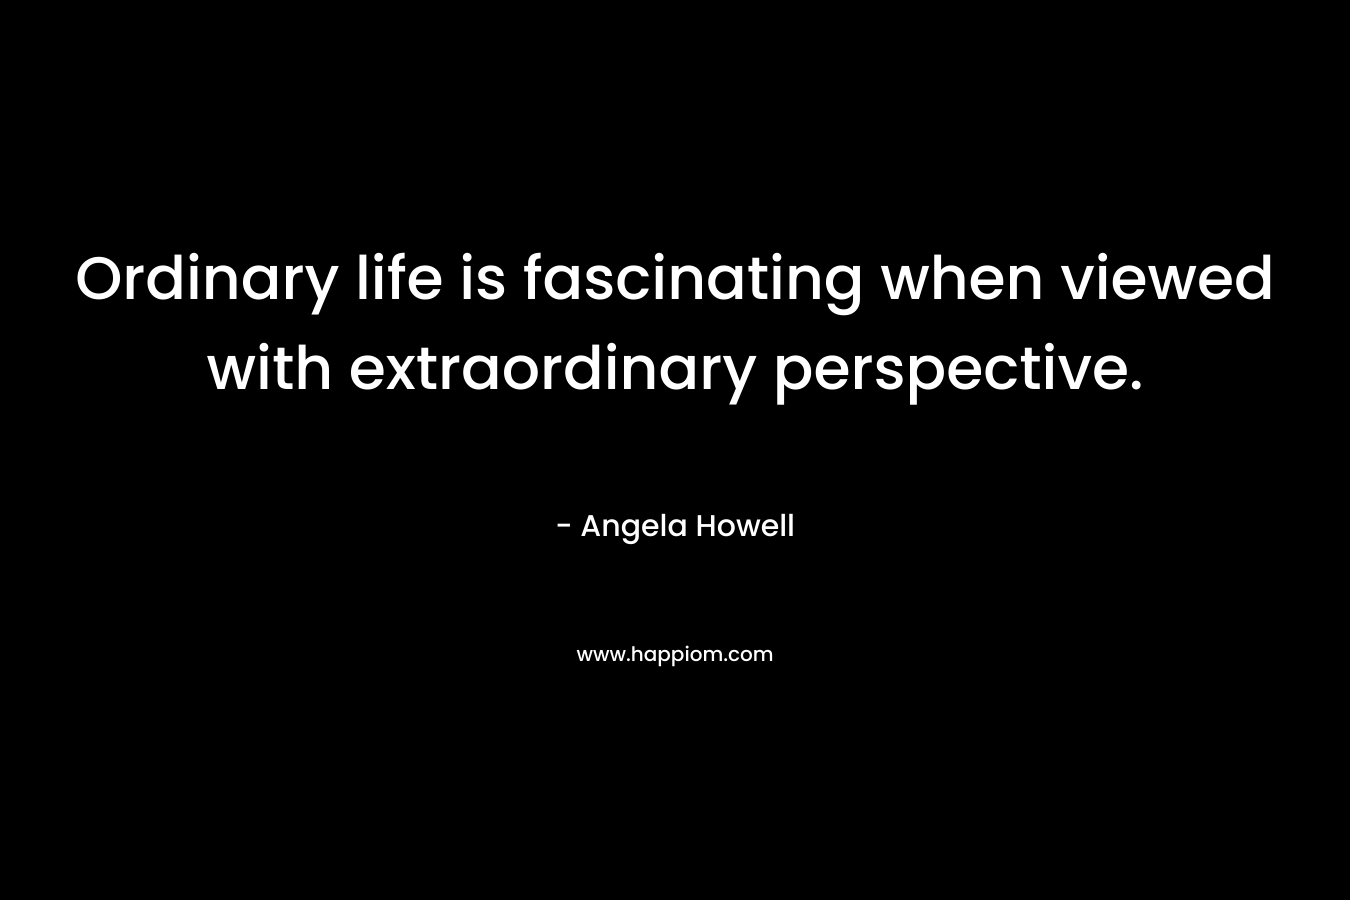 Ordinary life is fascinating when viewed with extraordinary perspective.